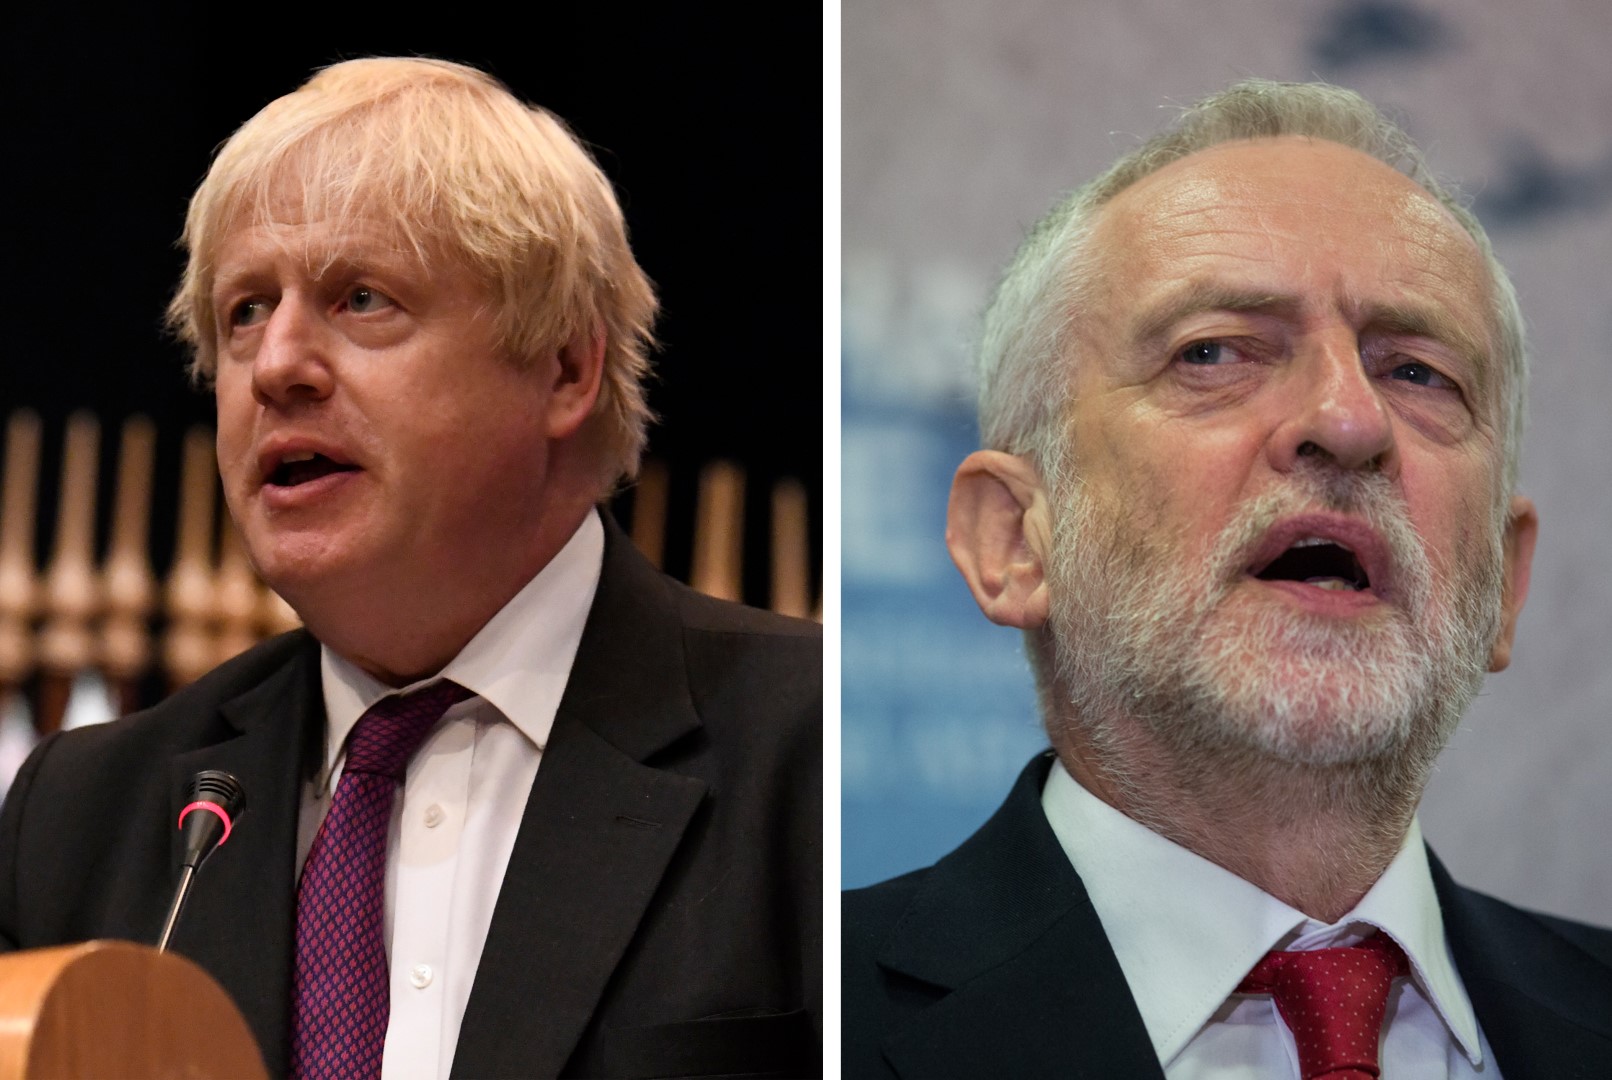 Boris Johnson Prime Minister, Jeremy Corbyn Leader of the Labour Party (credit wiki media) (Large)